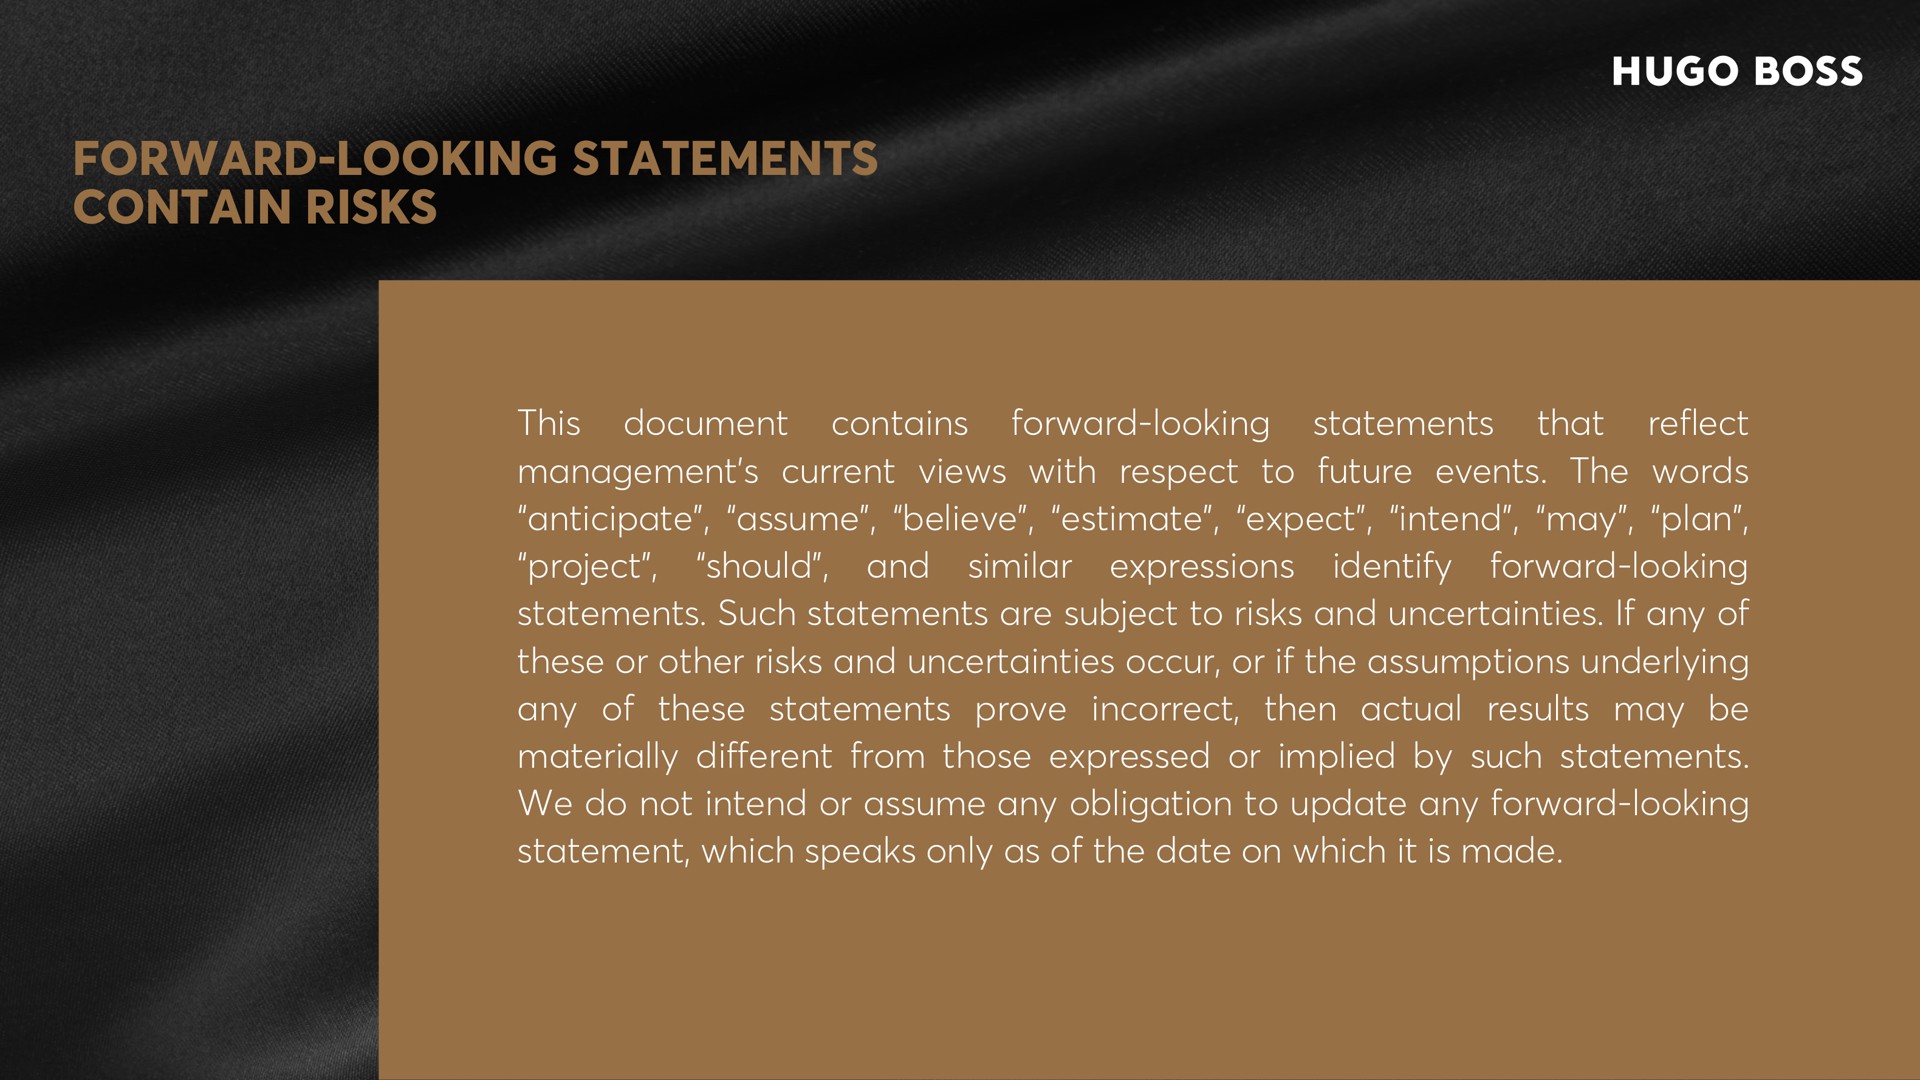 forward looking statements contain risks that contains forward looking statements should and similar expressions reflect this document management current views with respect to future events the words anticipate assume believe estimate expect intend may plan project identify forward looking statements such statements are subject to risks and uncertainties if any of these or other risks and uncertainties occur or if the assumptions underlying any of these statements prove incorrect then actual results may be materially different from those expressed or implied by such statements we do not intend or assume any obligation to update any forward looking statement which speaks only as of the date on which it is made page boss | Hugo Boss